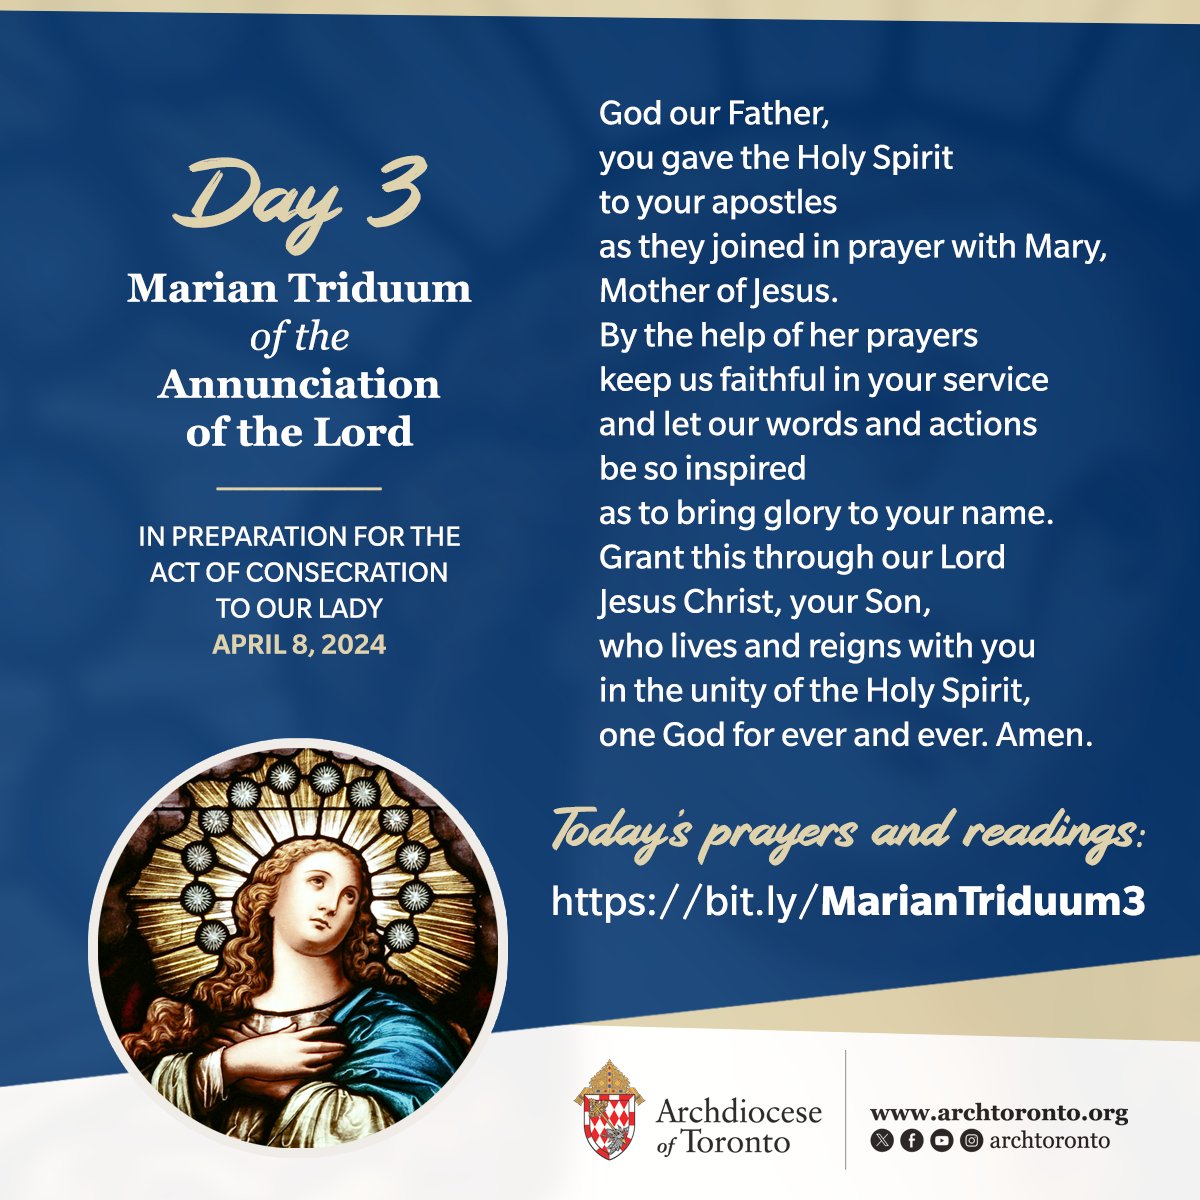 Today is day 3 of the Marian Triduum of the Annunciation of the Lord, in preparation for the archdiocesan Consecration to the Blessed Virgin Mary on April 8. See today's prayers and readings: bit.ly/MarianTriduum3